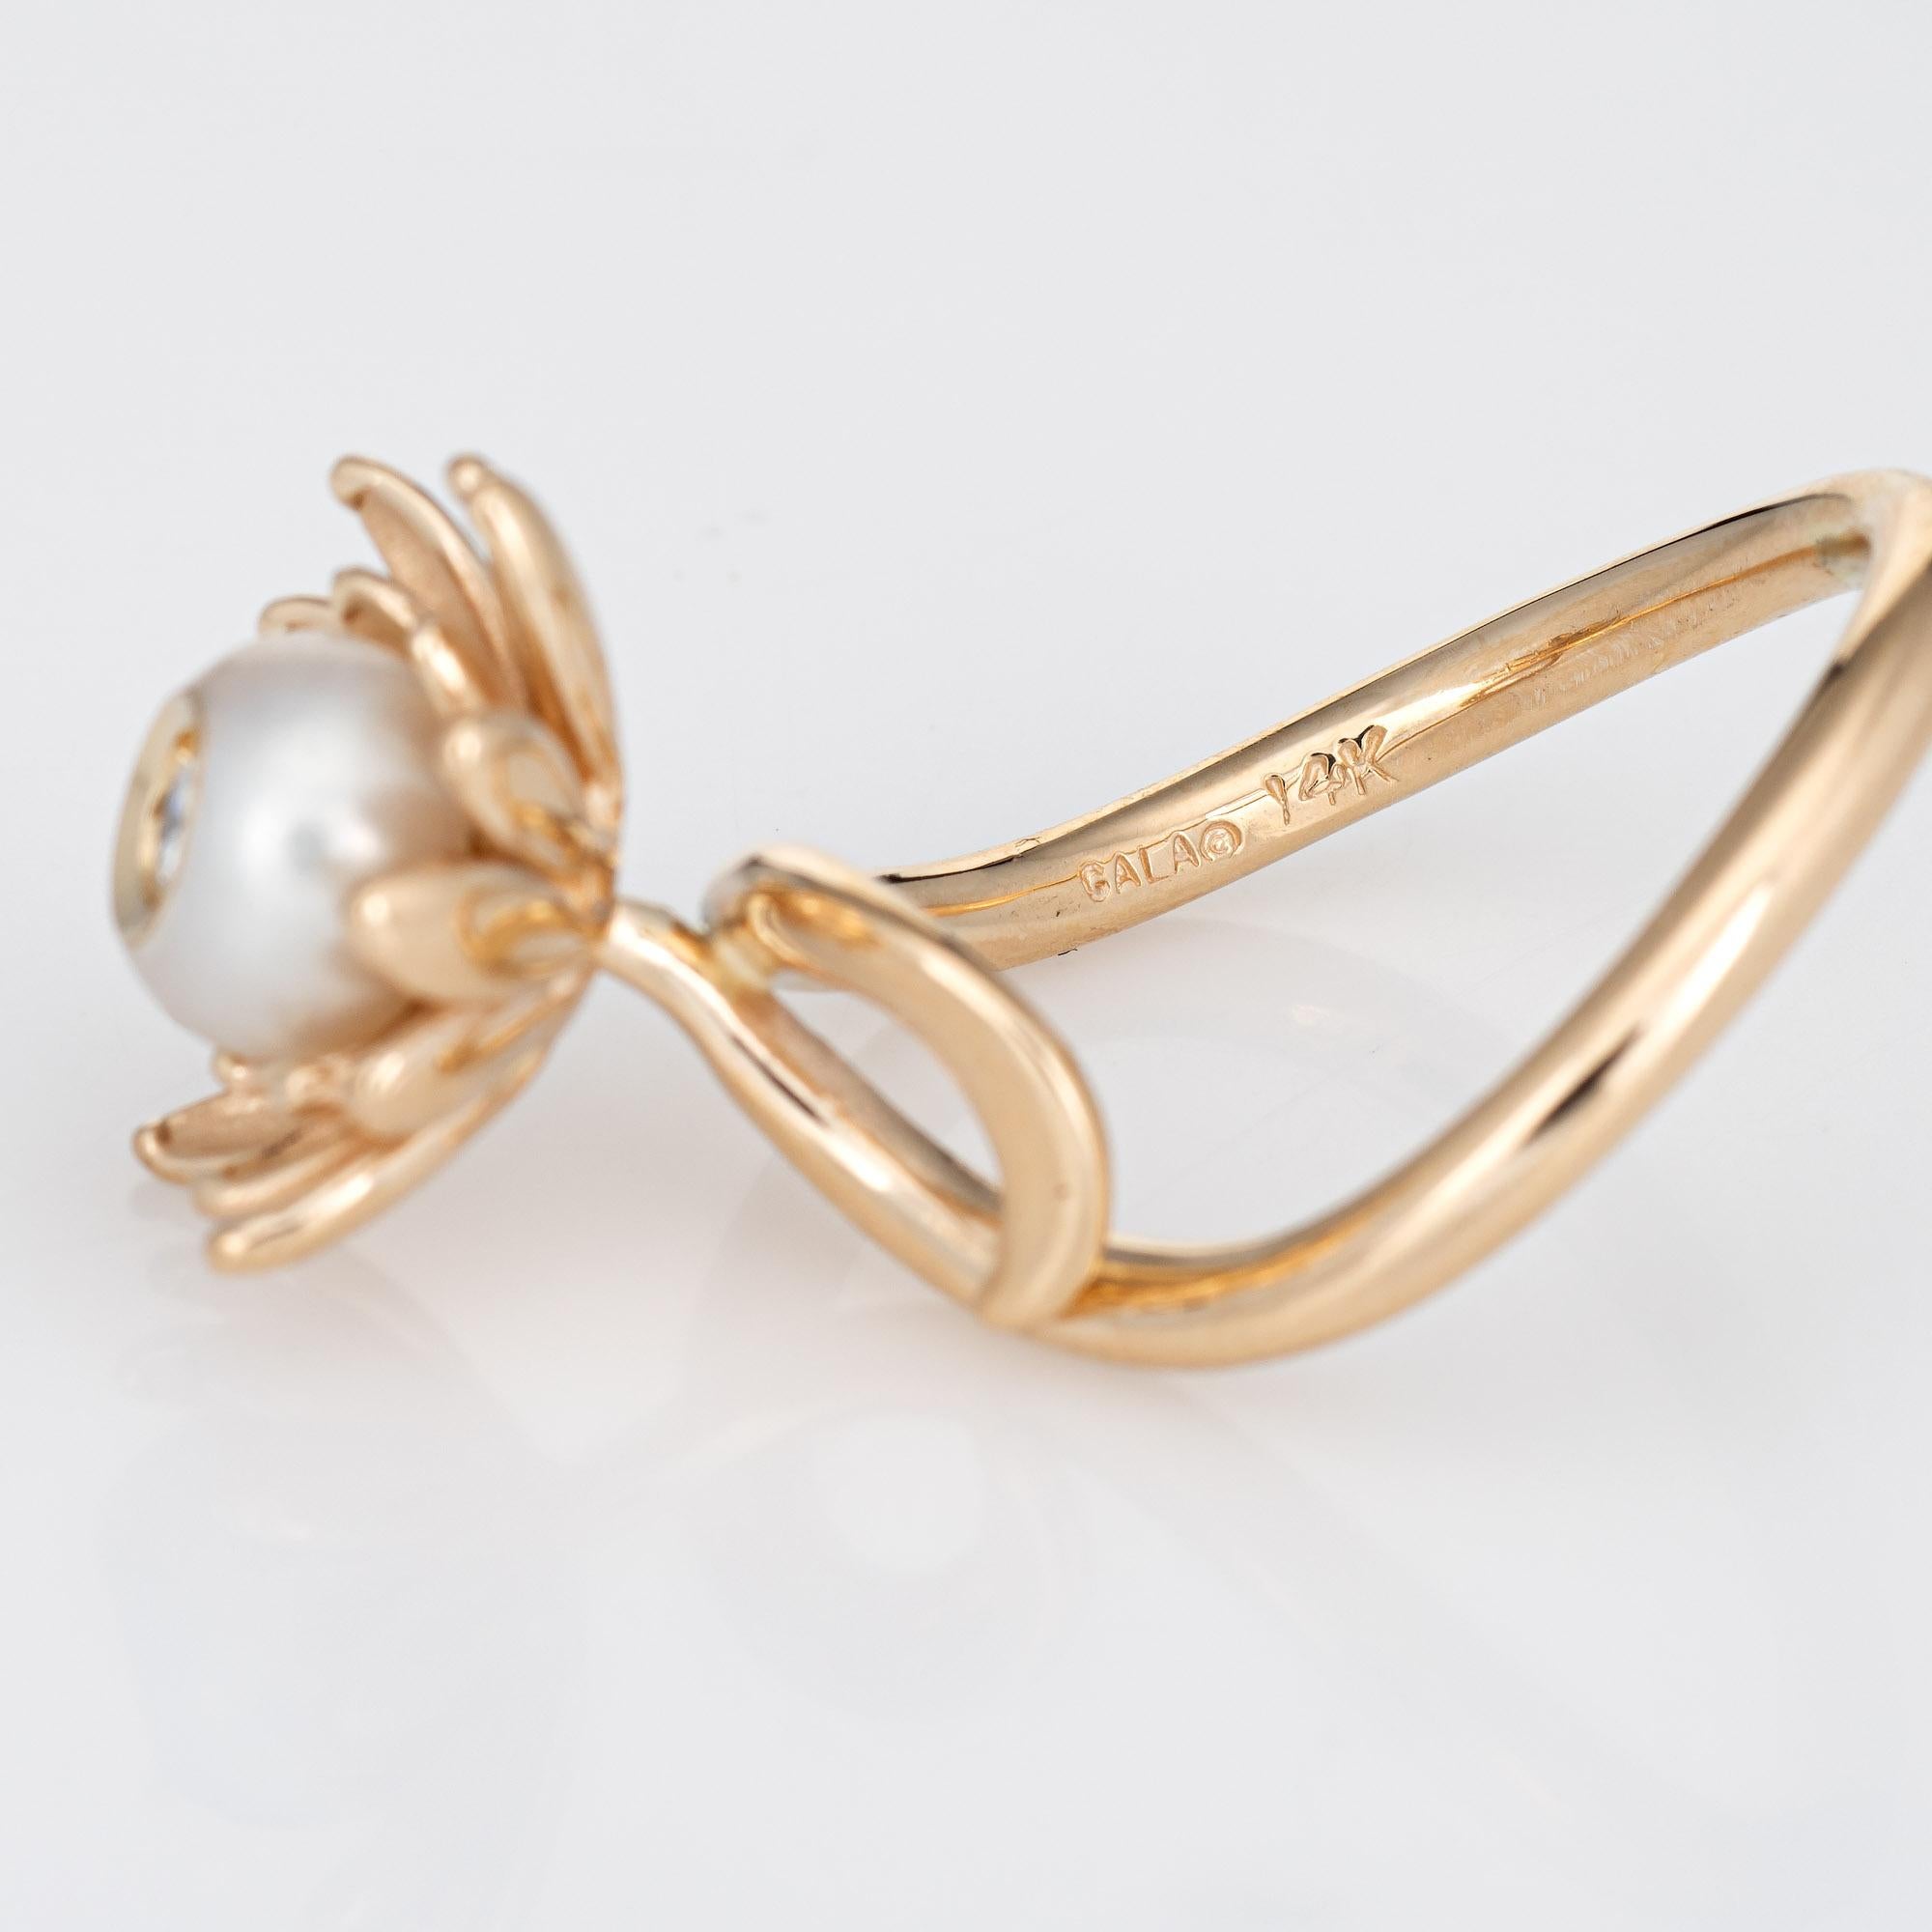 Round Cut Diamond in Pearl Flower Ring Vintage 14k Yellow Gold Estate Fine Jewelry For Sale